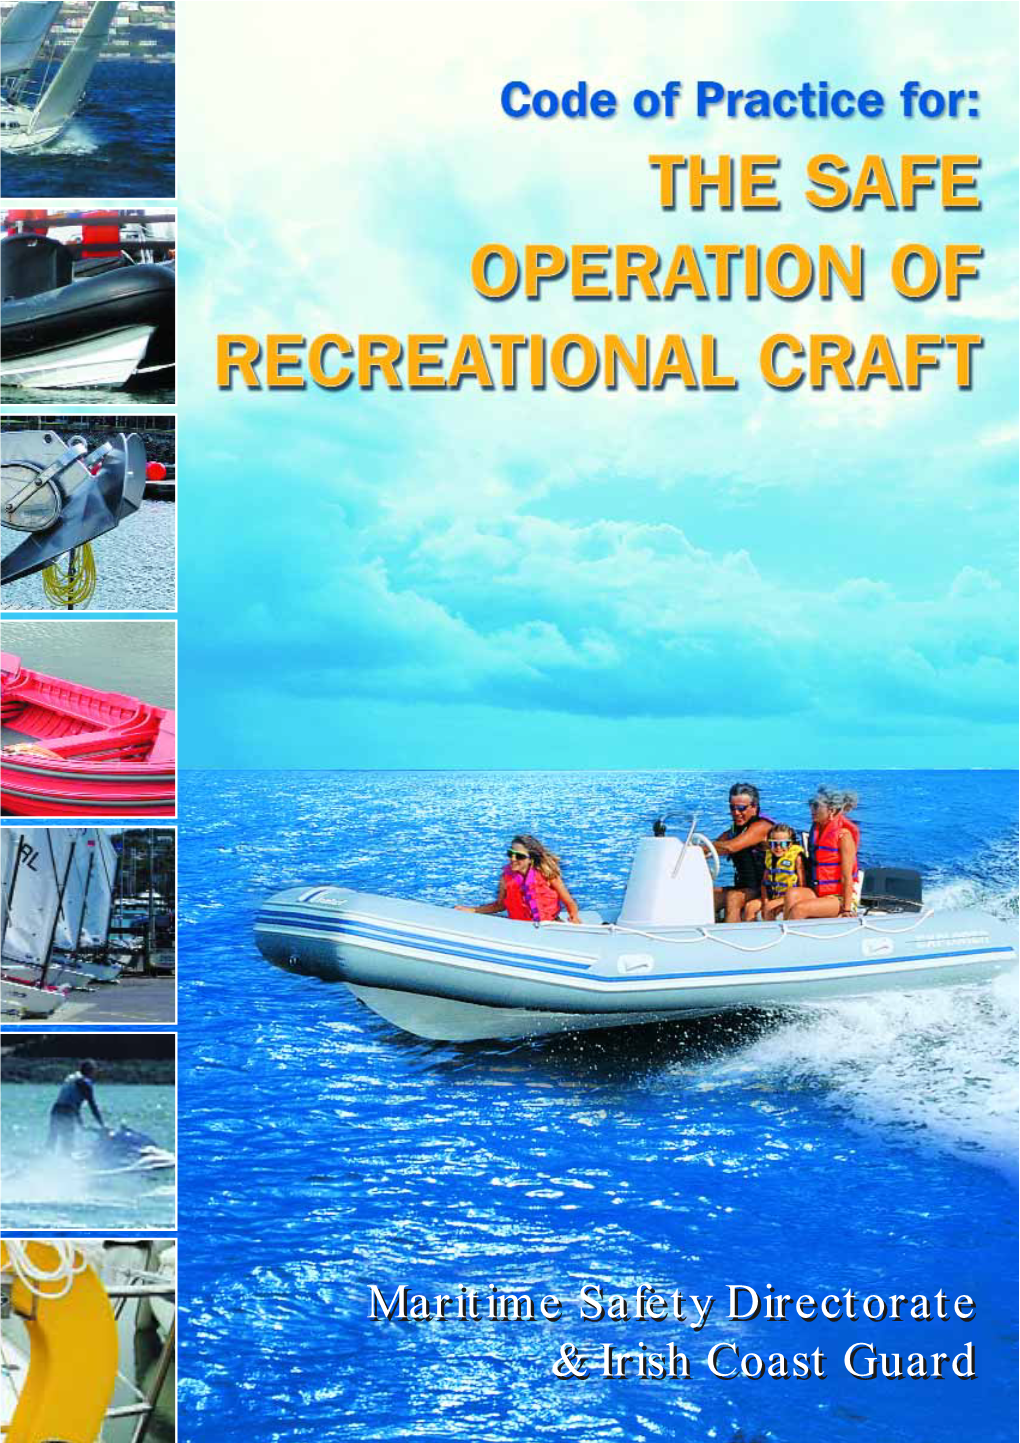 Code of Practice for the Safe Operation of Recreational Craft